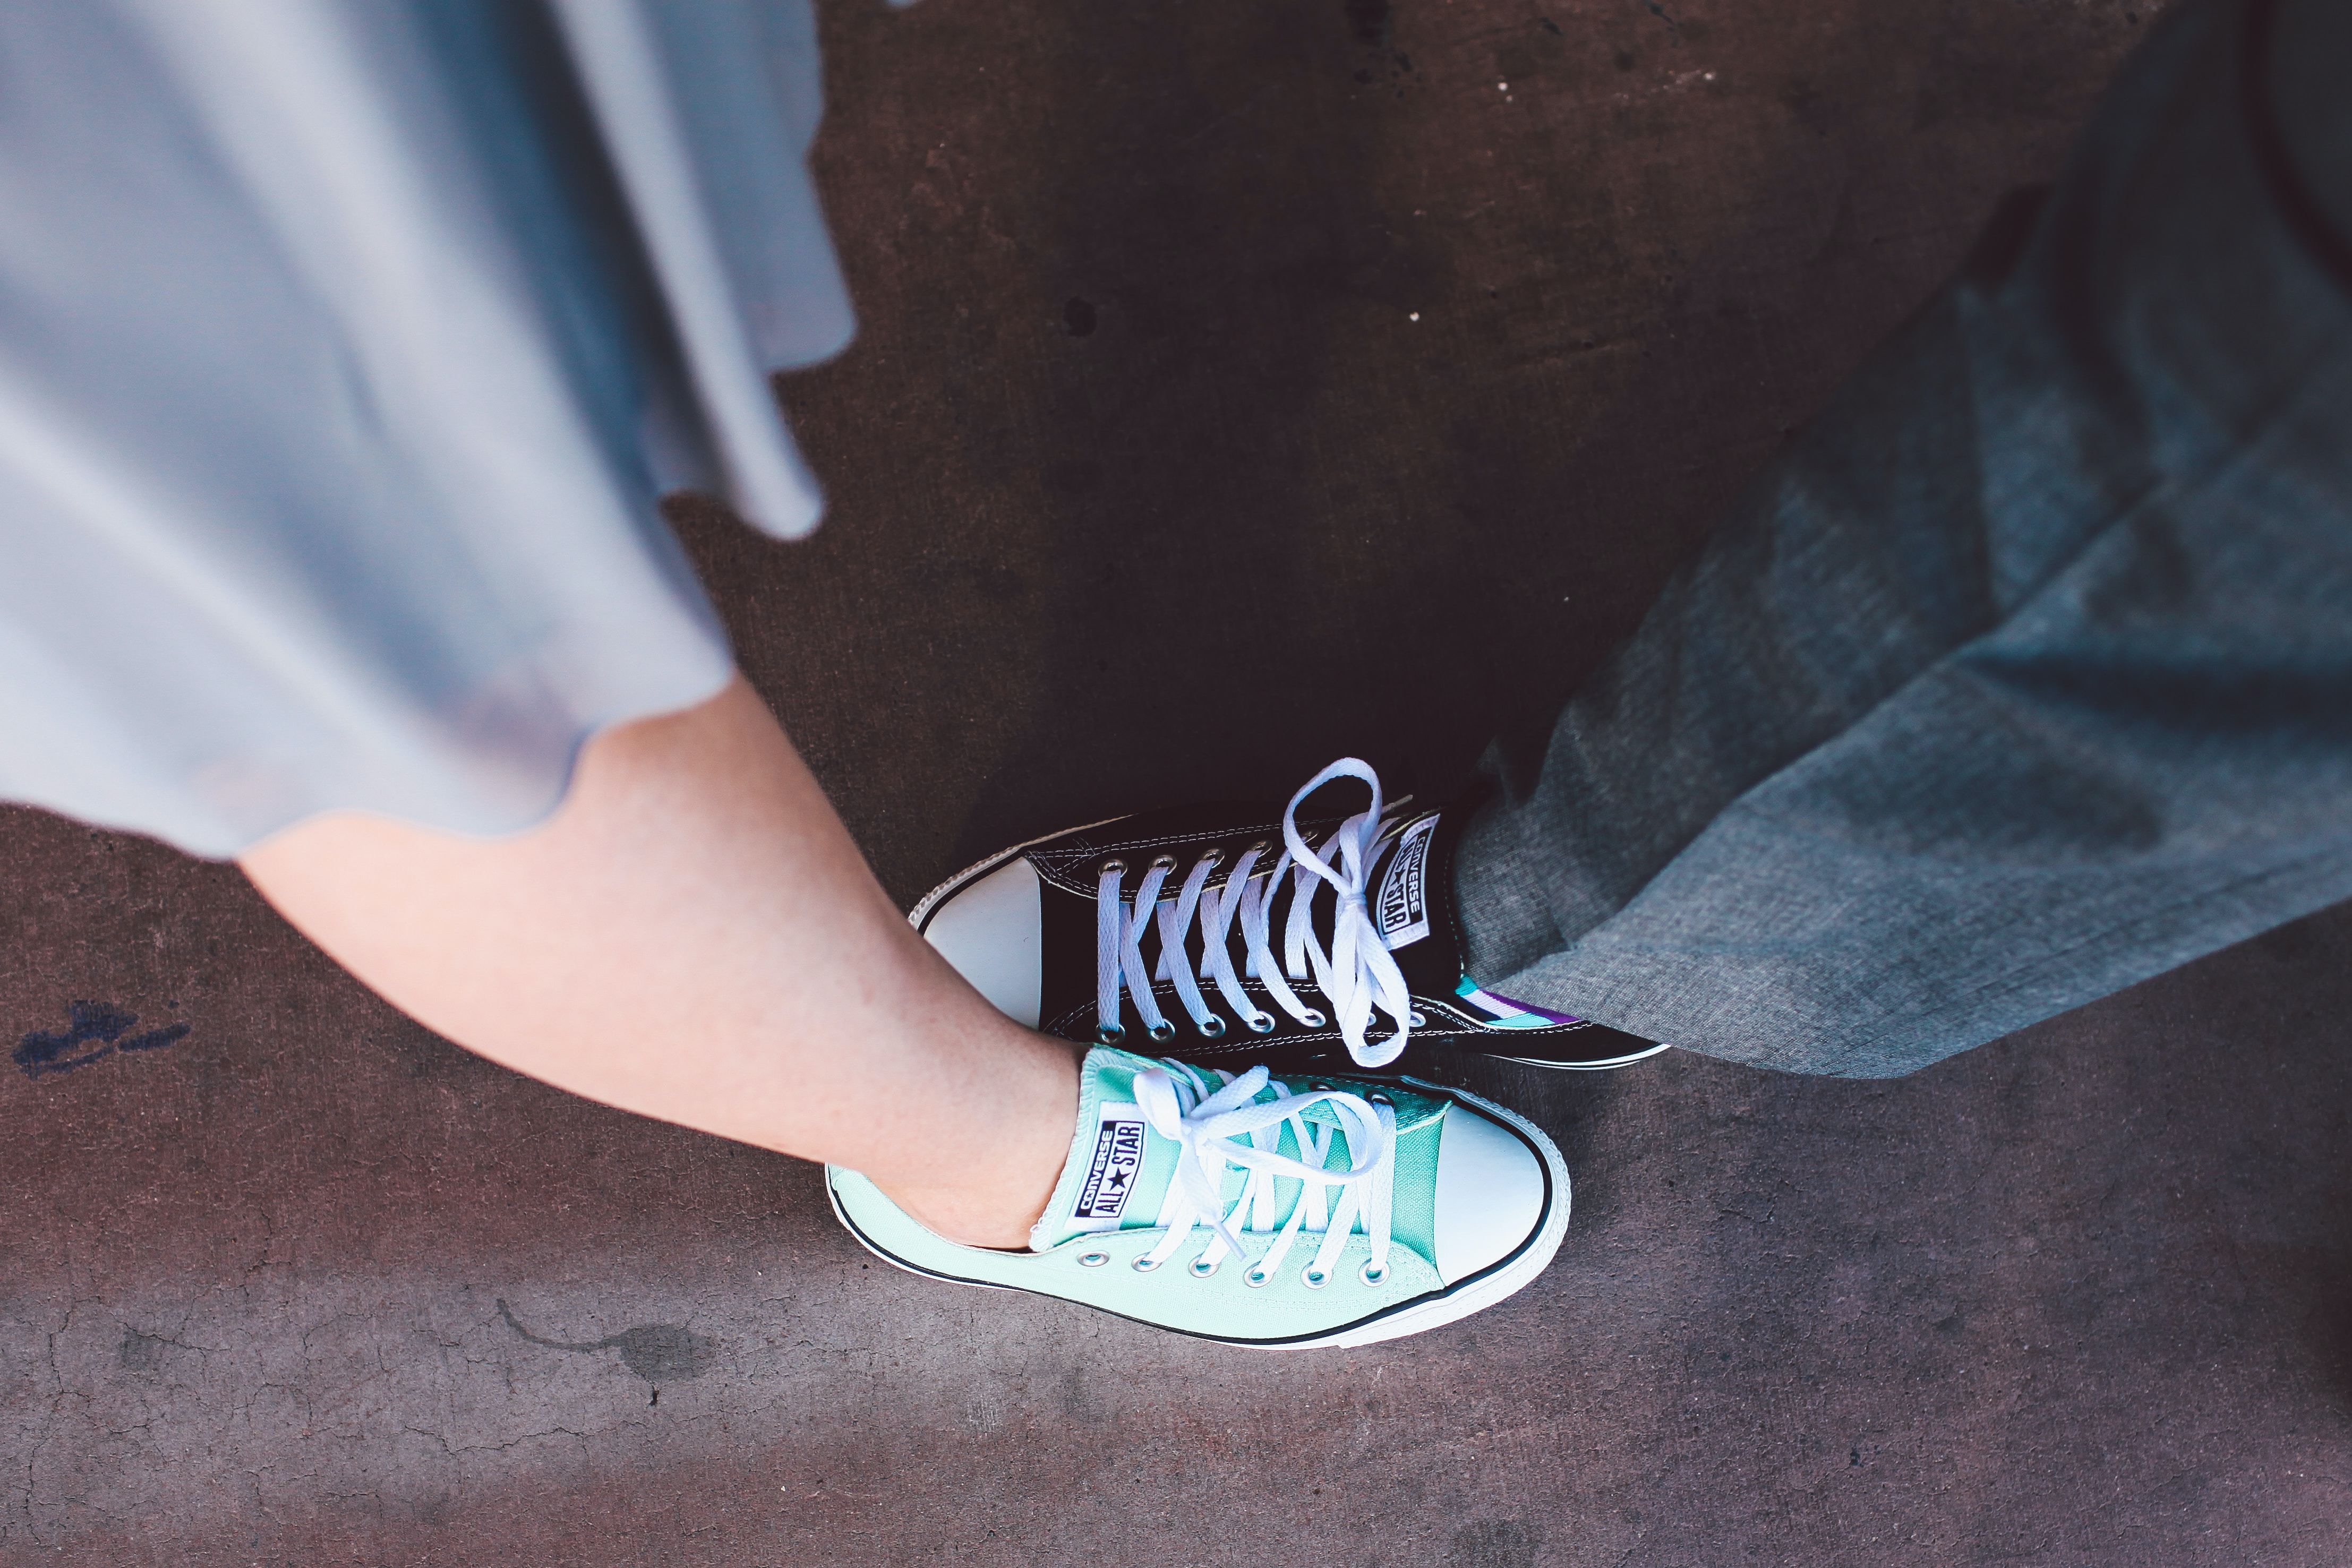 Two individuals wearing All Star converse shoes. | Source: Unsplash